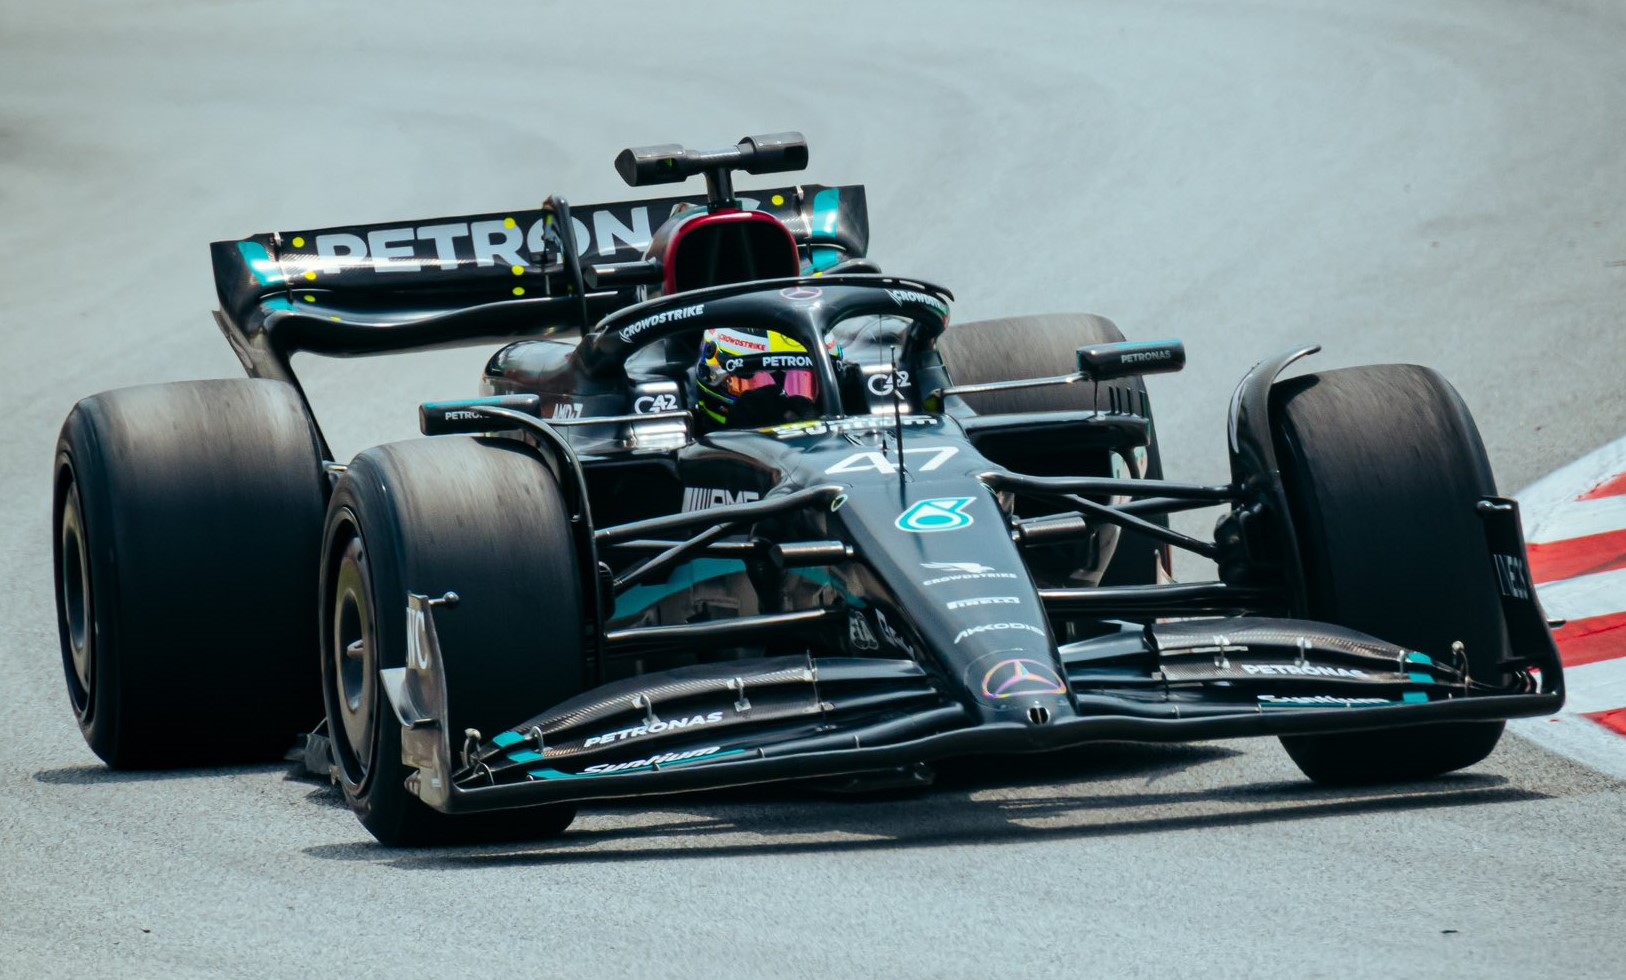 Schumacher impressed with Mercedes W14 after debut